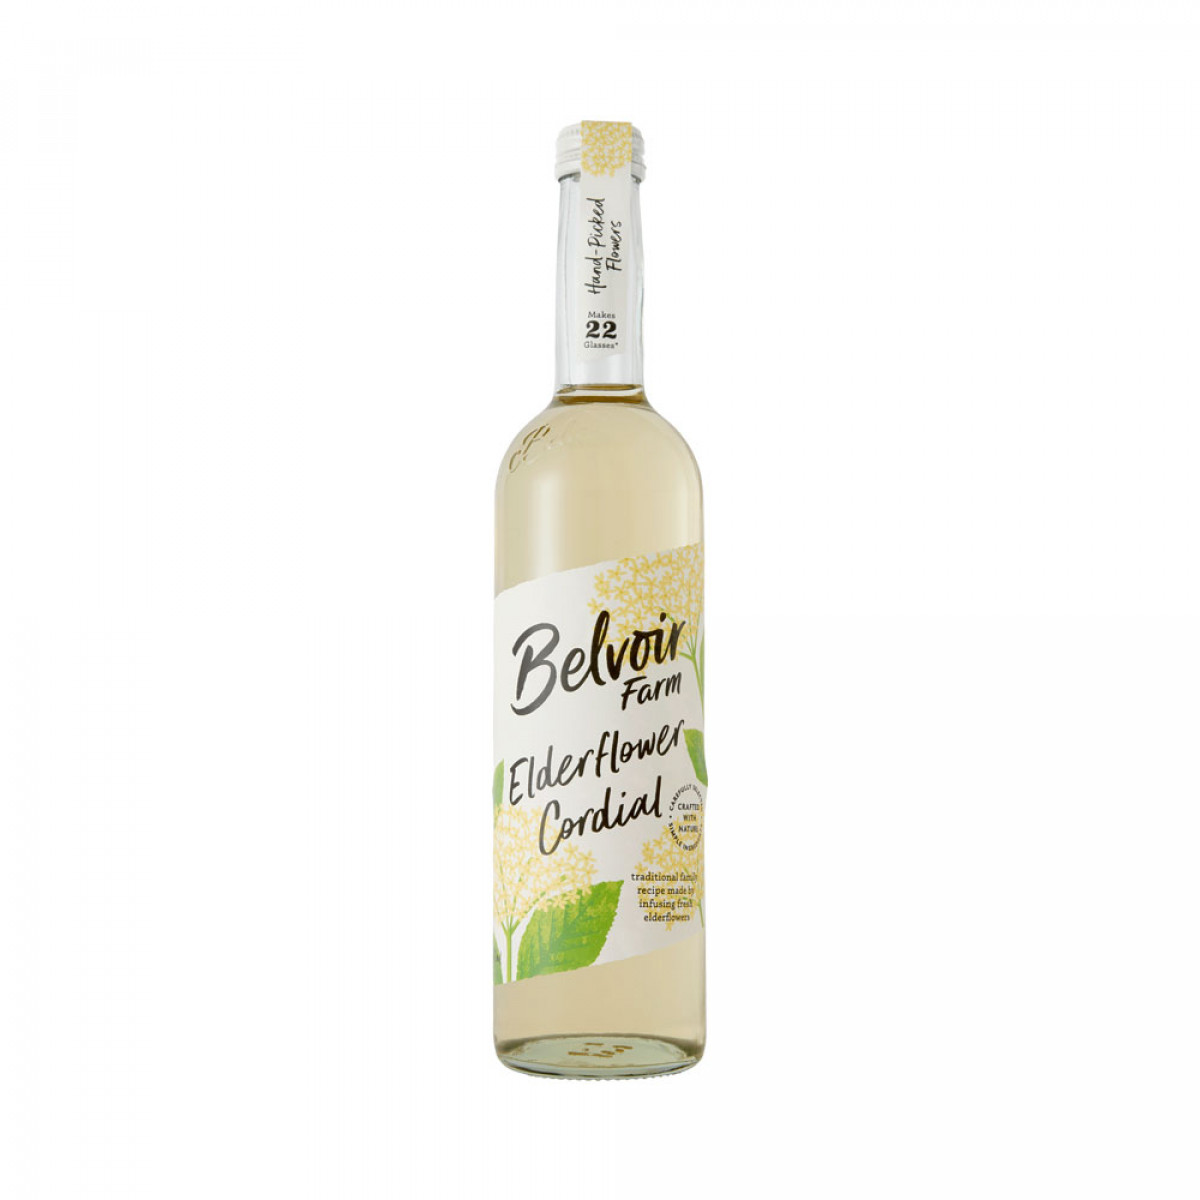 Product picture for Elderflower Cordial